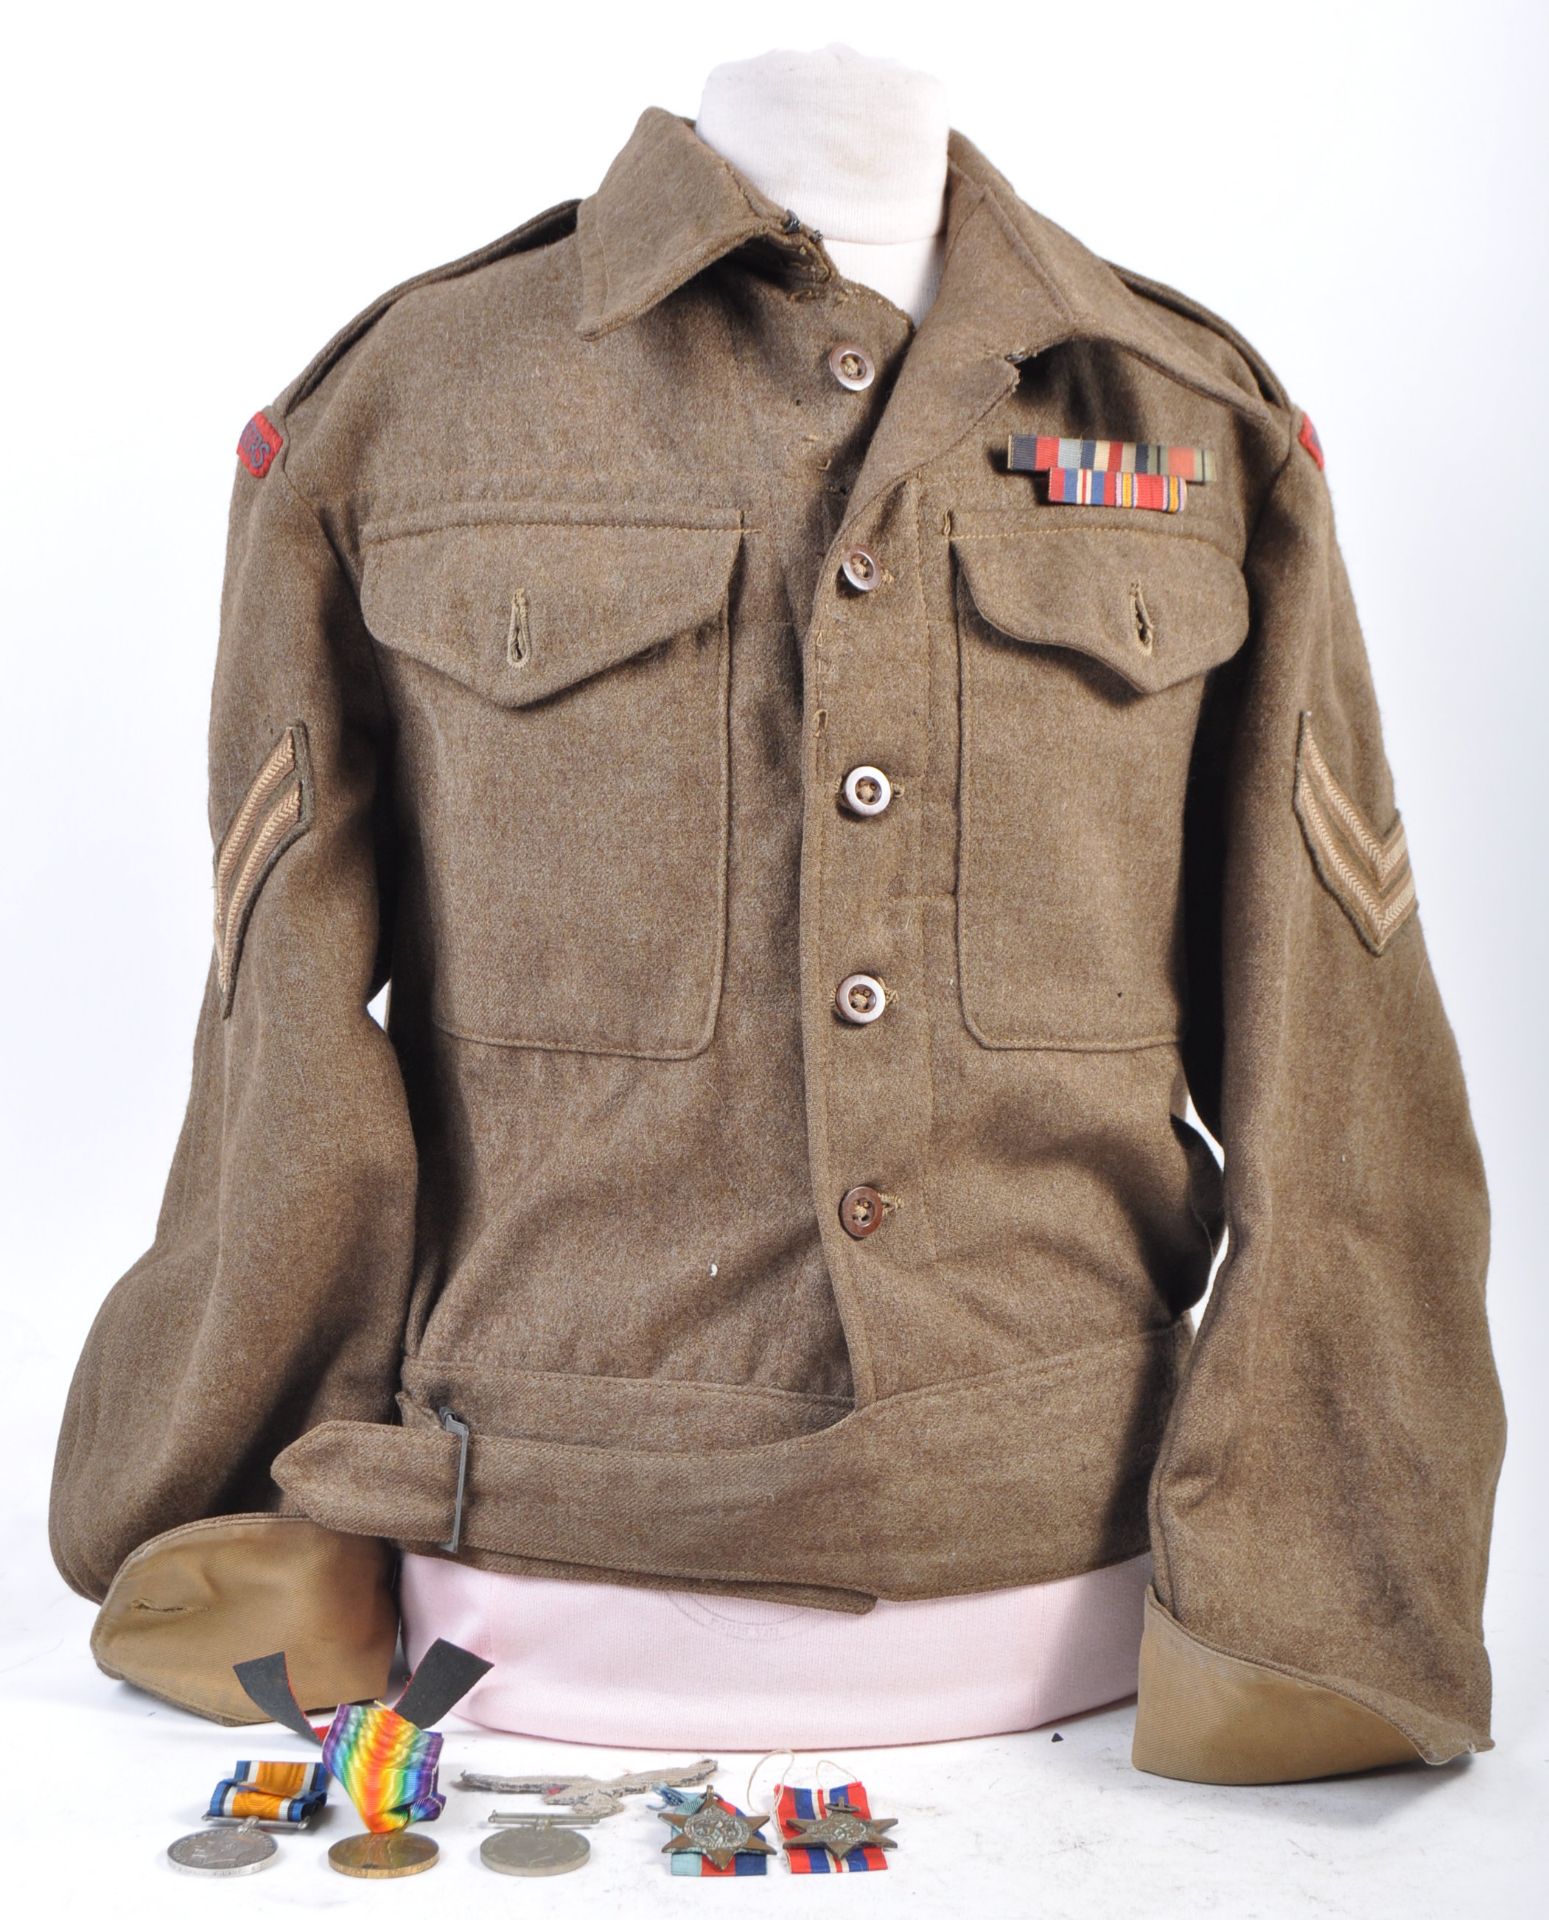 A BRITISH ROYAL ENGINEERS UNIFORM TUNIC AND MEDAL GROUP